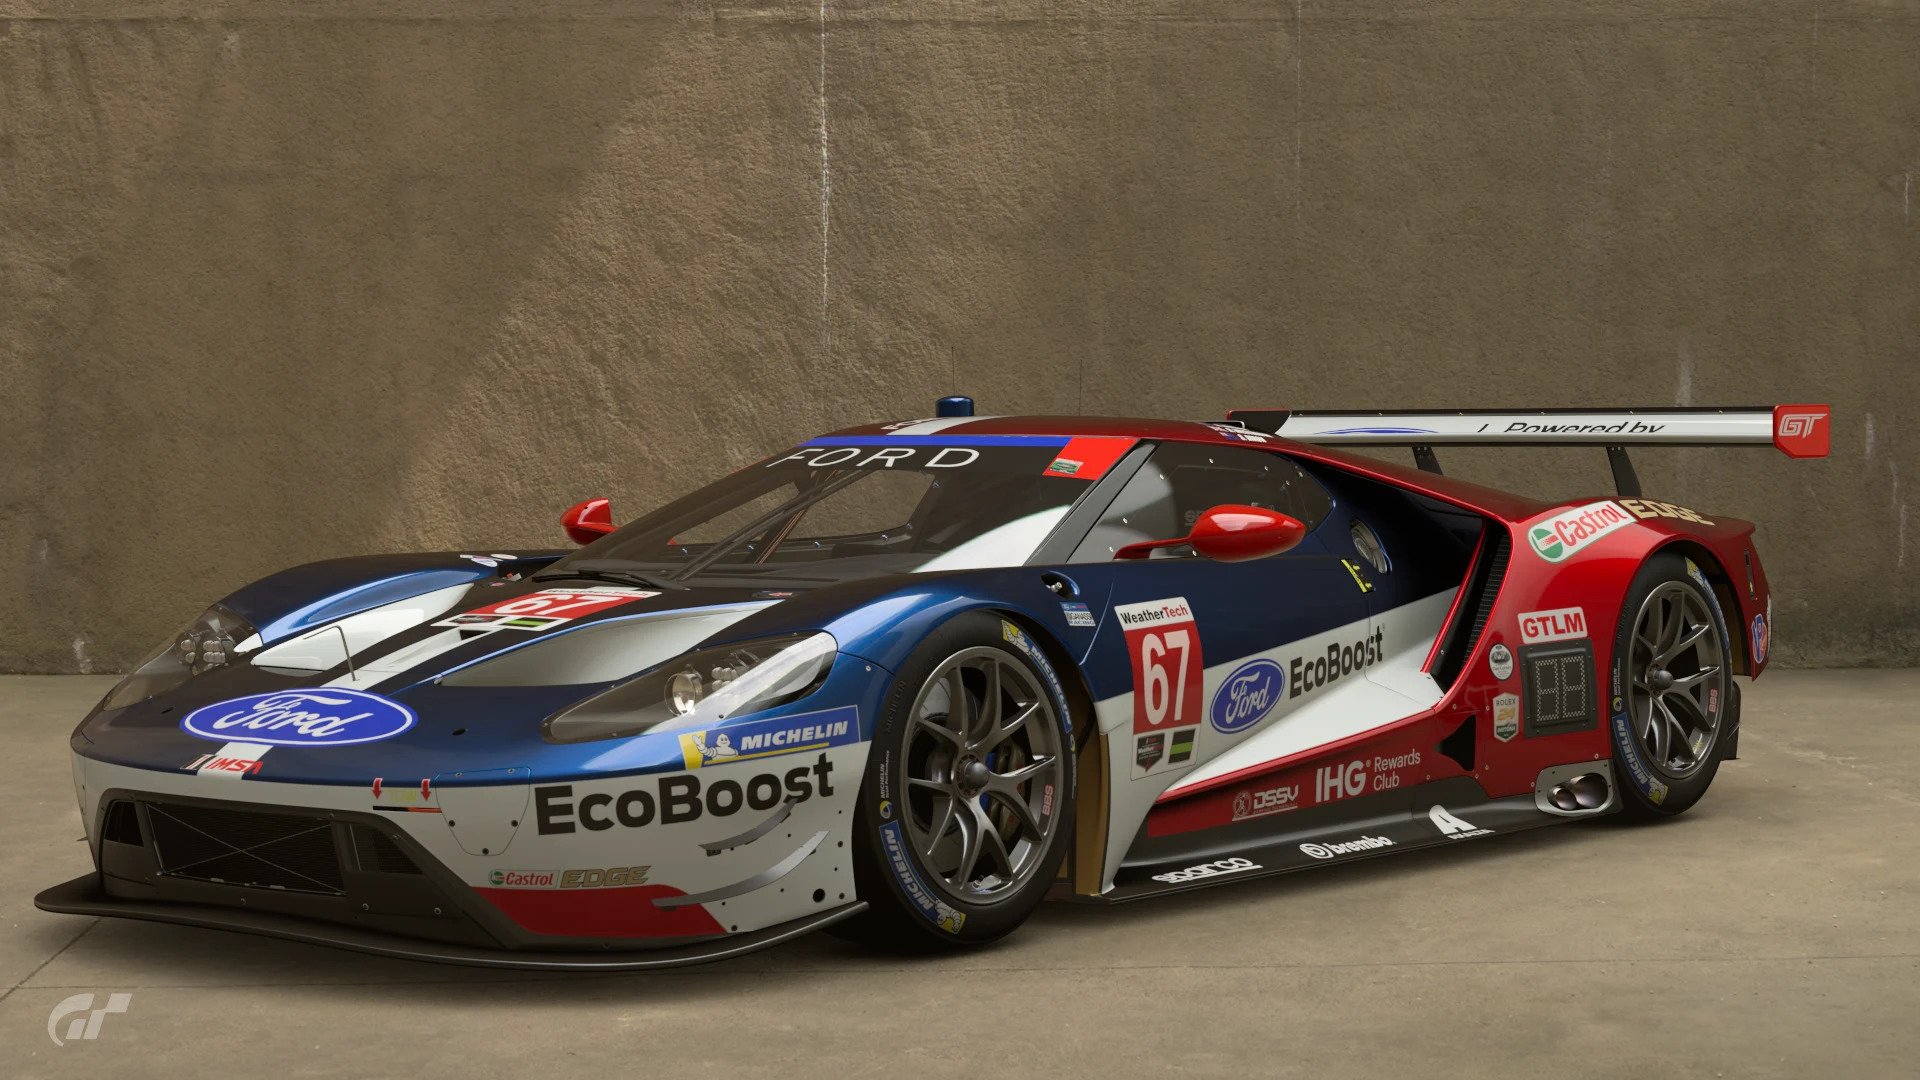 Gran Turismo 7 - Ford GT LM Race Car Spec II @ Monza #FordGTRaceCar  #GranTurismo7 #PlayStation4, By Gran Turismo Videos and Photos